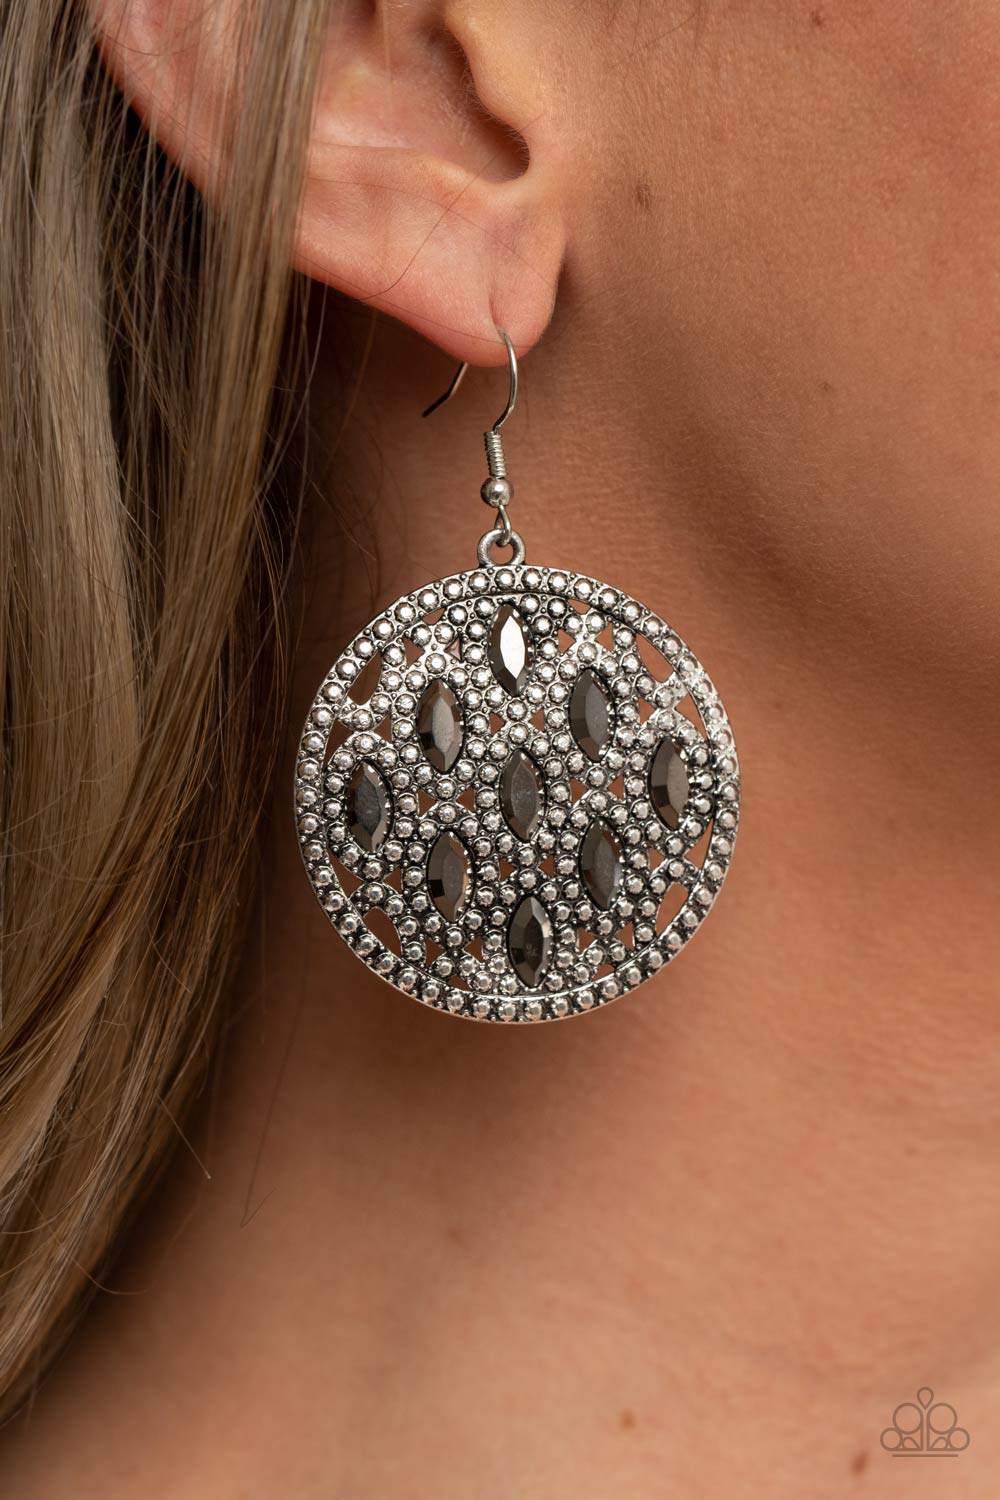 Paparazzi Accessories Iconic Impression Silver Earrings - Jewelry by Bretta